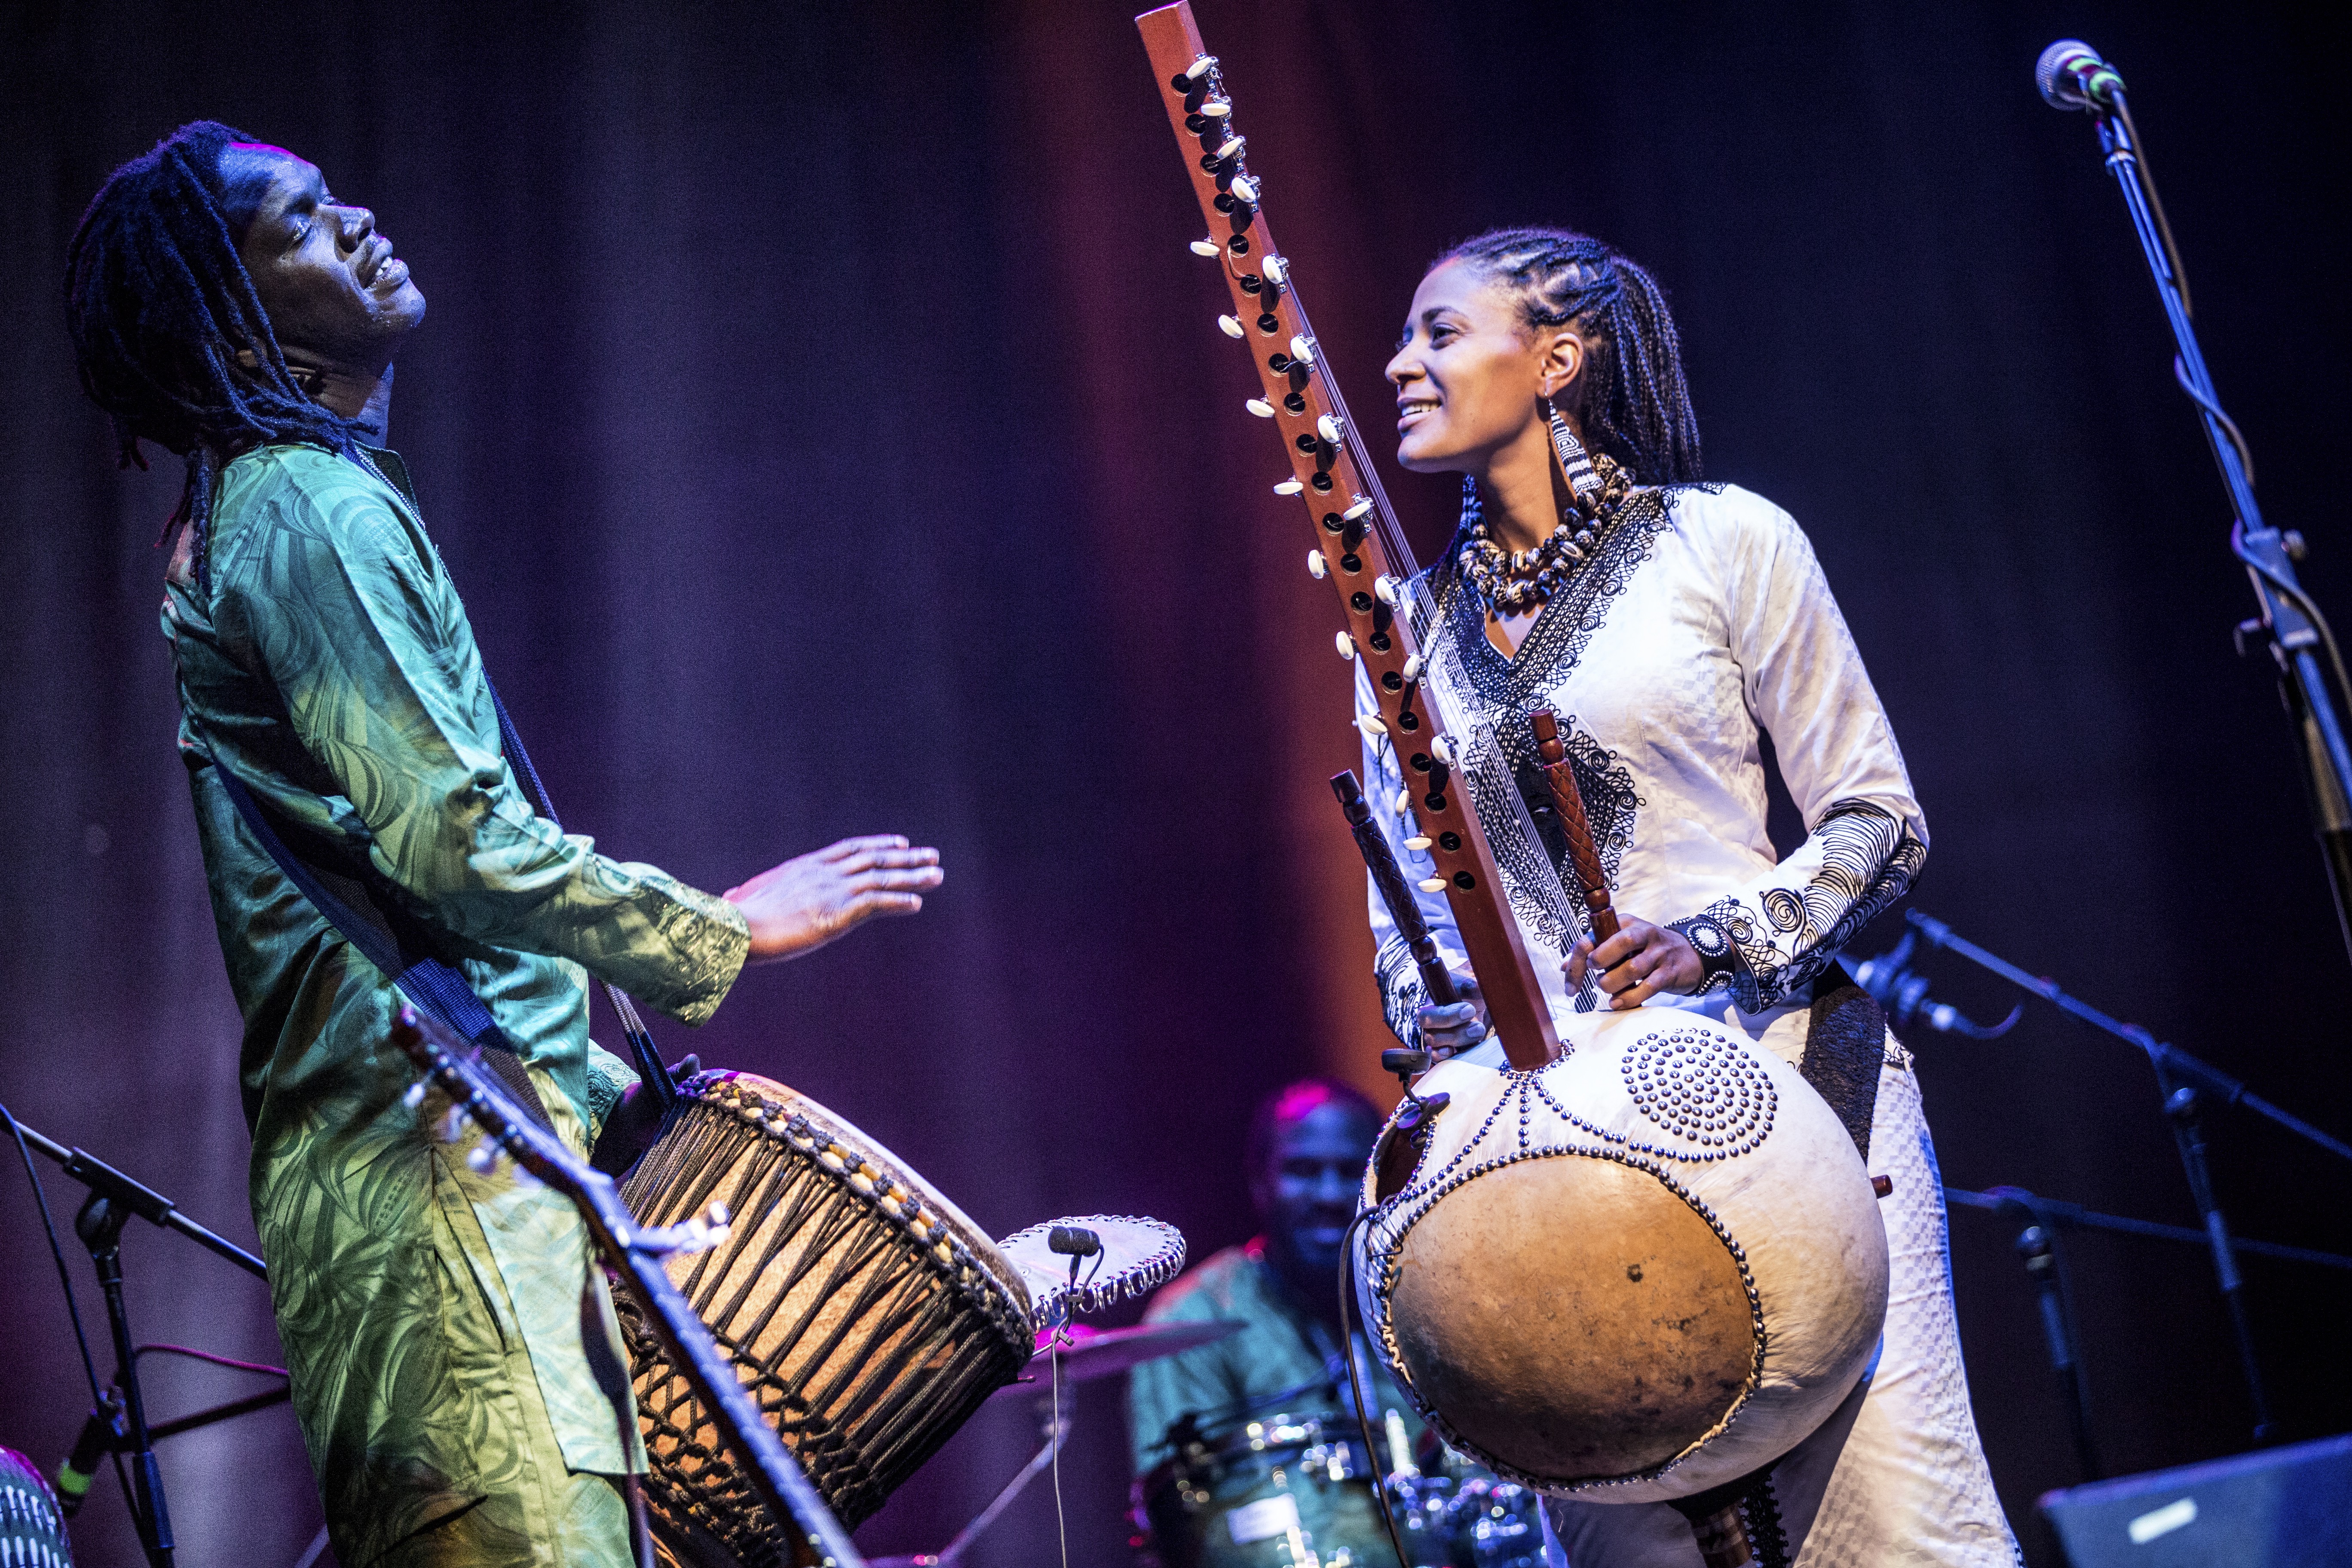 Sona Jobarteh is one of the most exciting new talents from the West African Griot tradition.